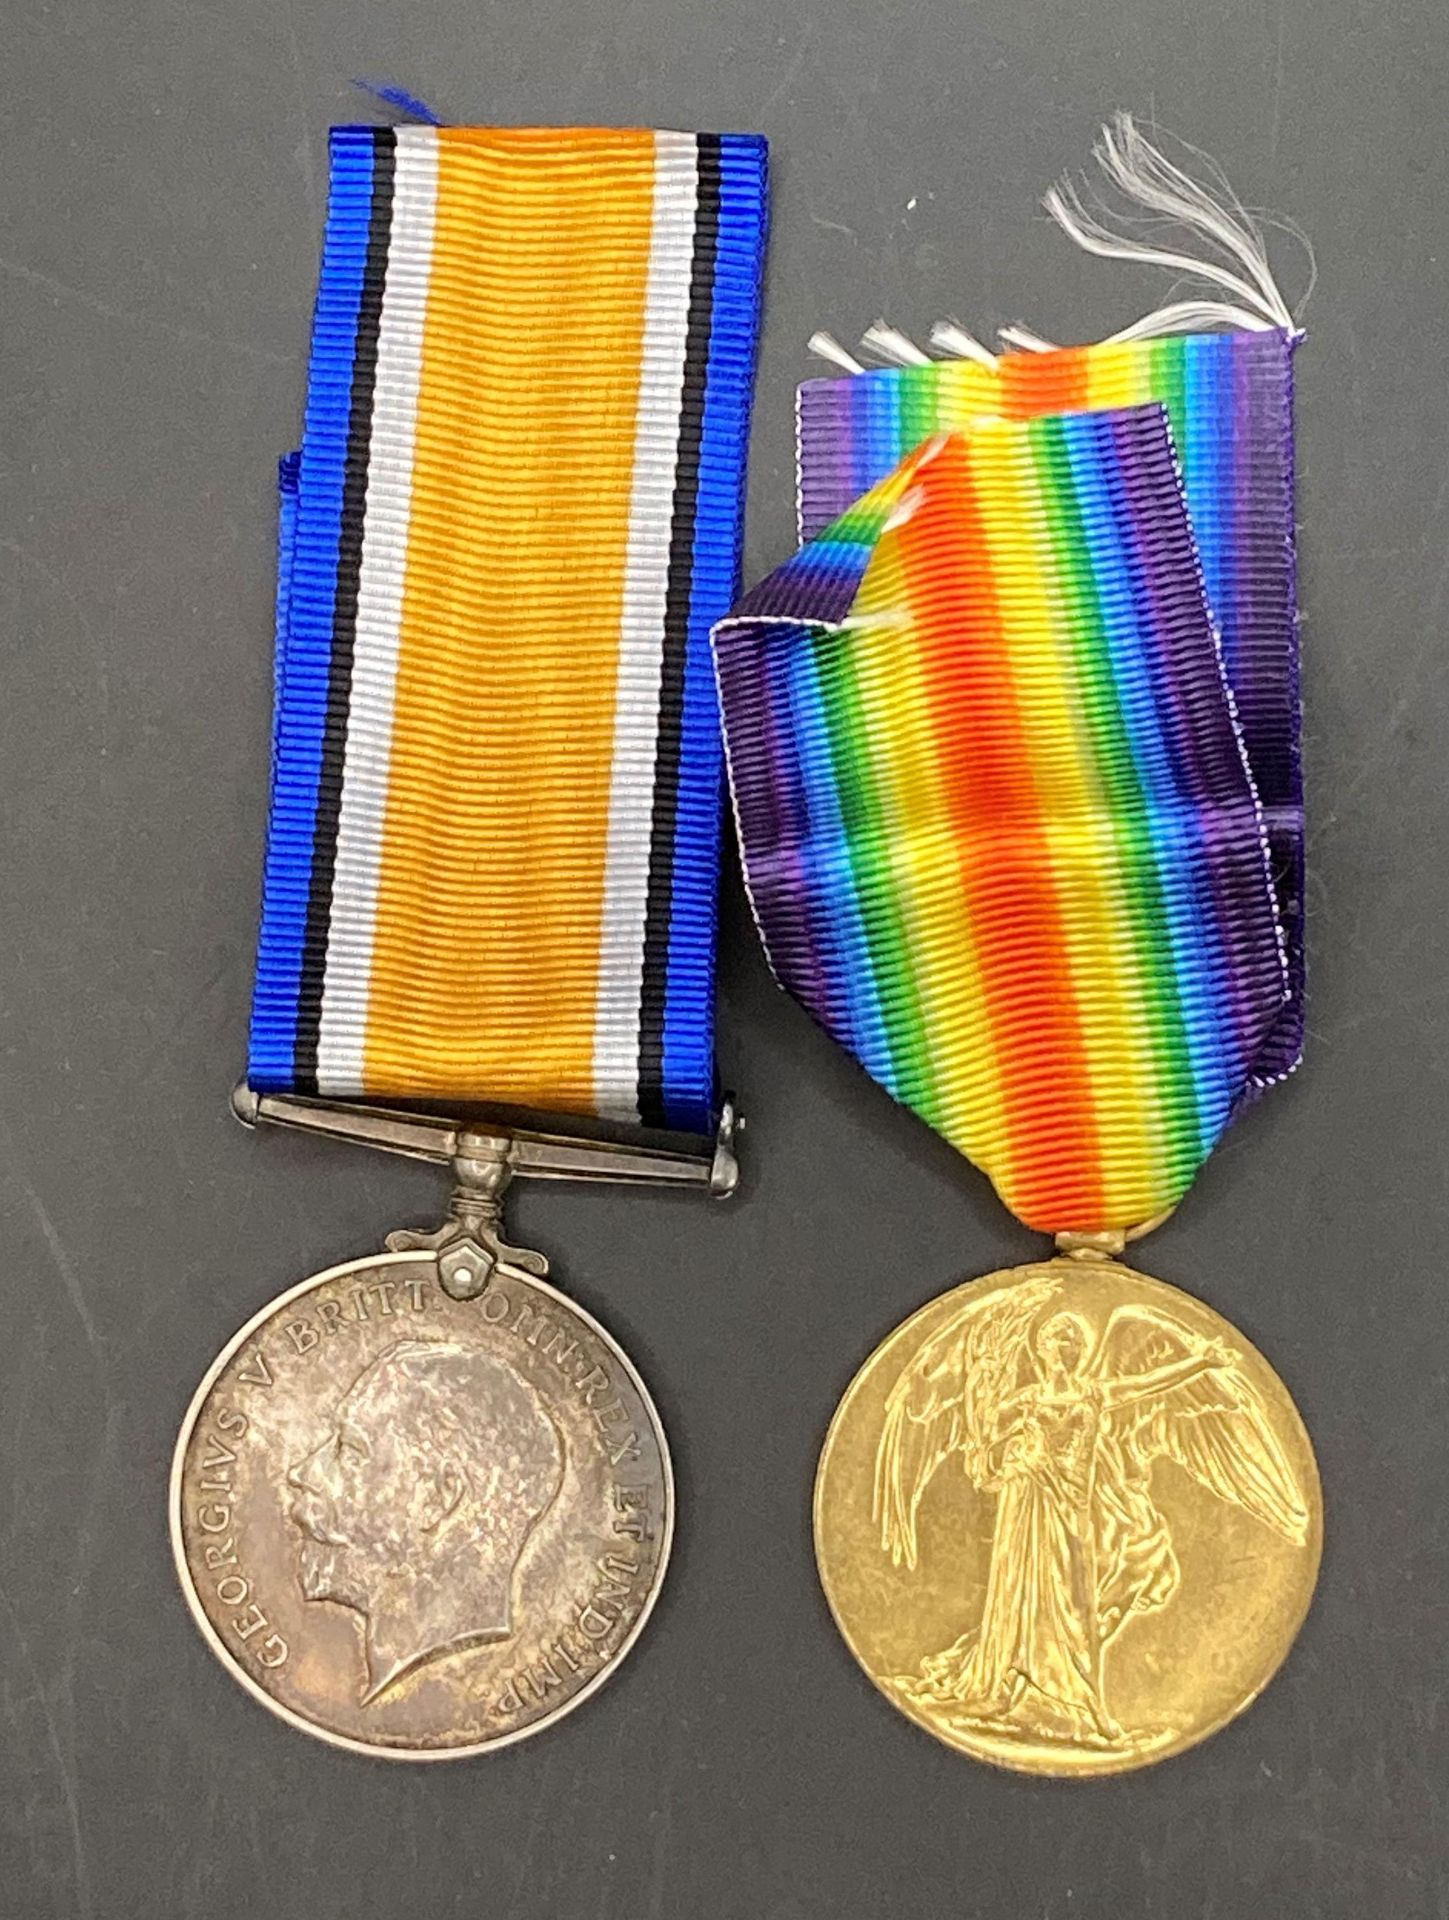 Two First World War medals - War Medal and Victory Medal complete with ribbons to 030326 Pte B H